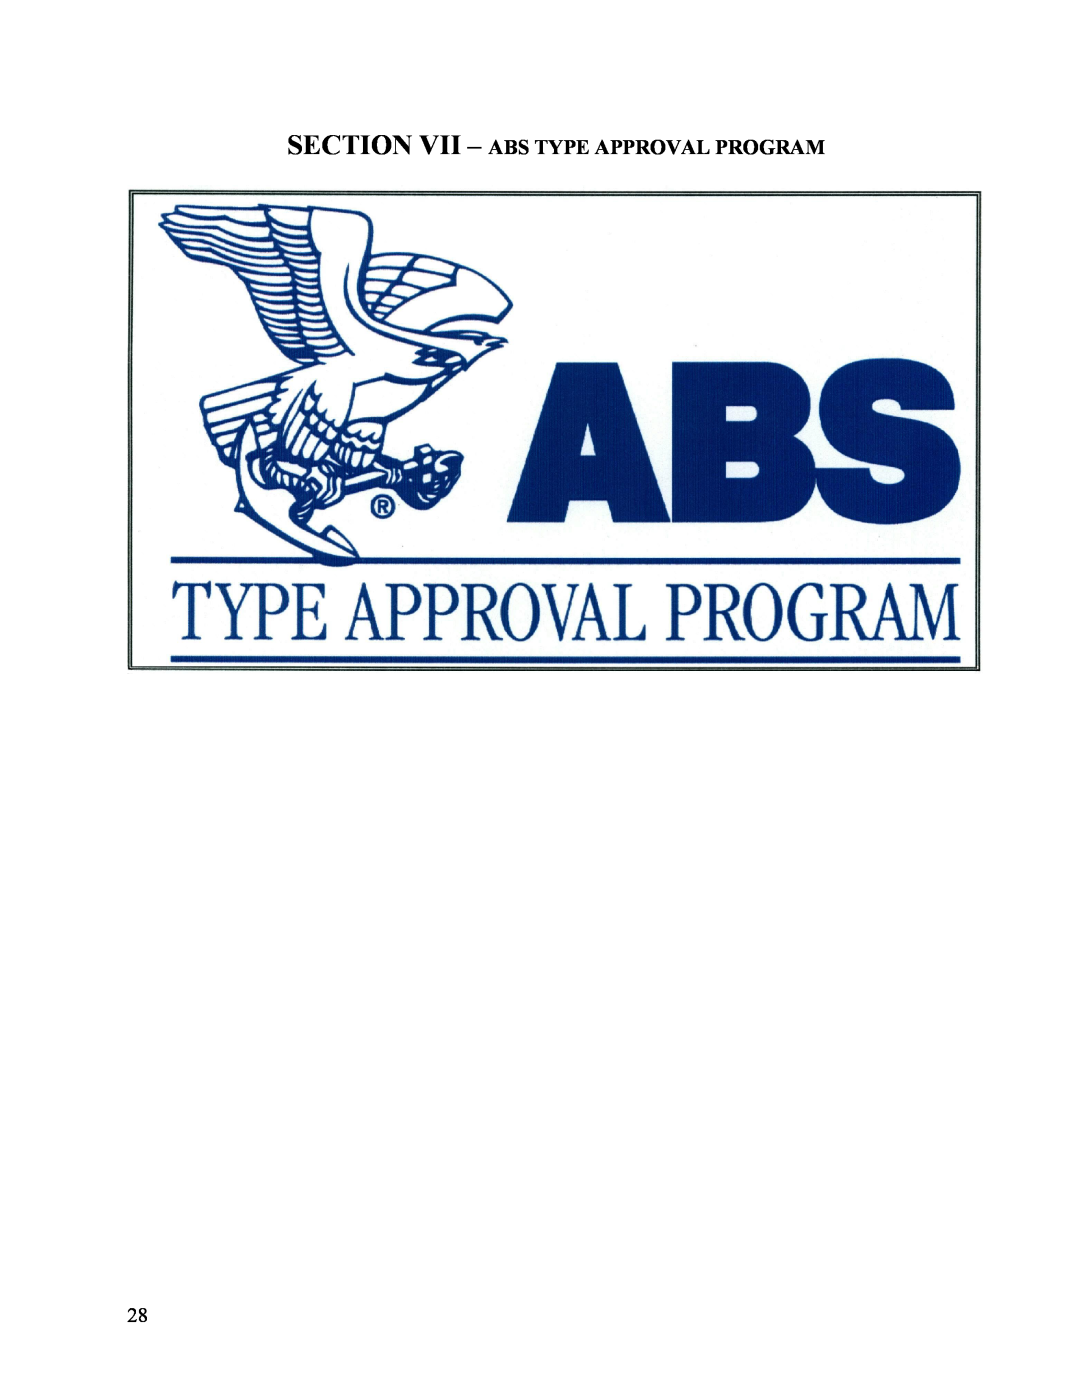 Hubbell Electric Heater Company MSE manual Section Vii – Abs Type Approval Program 